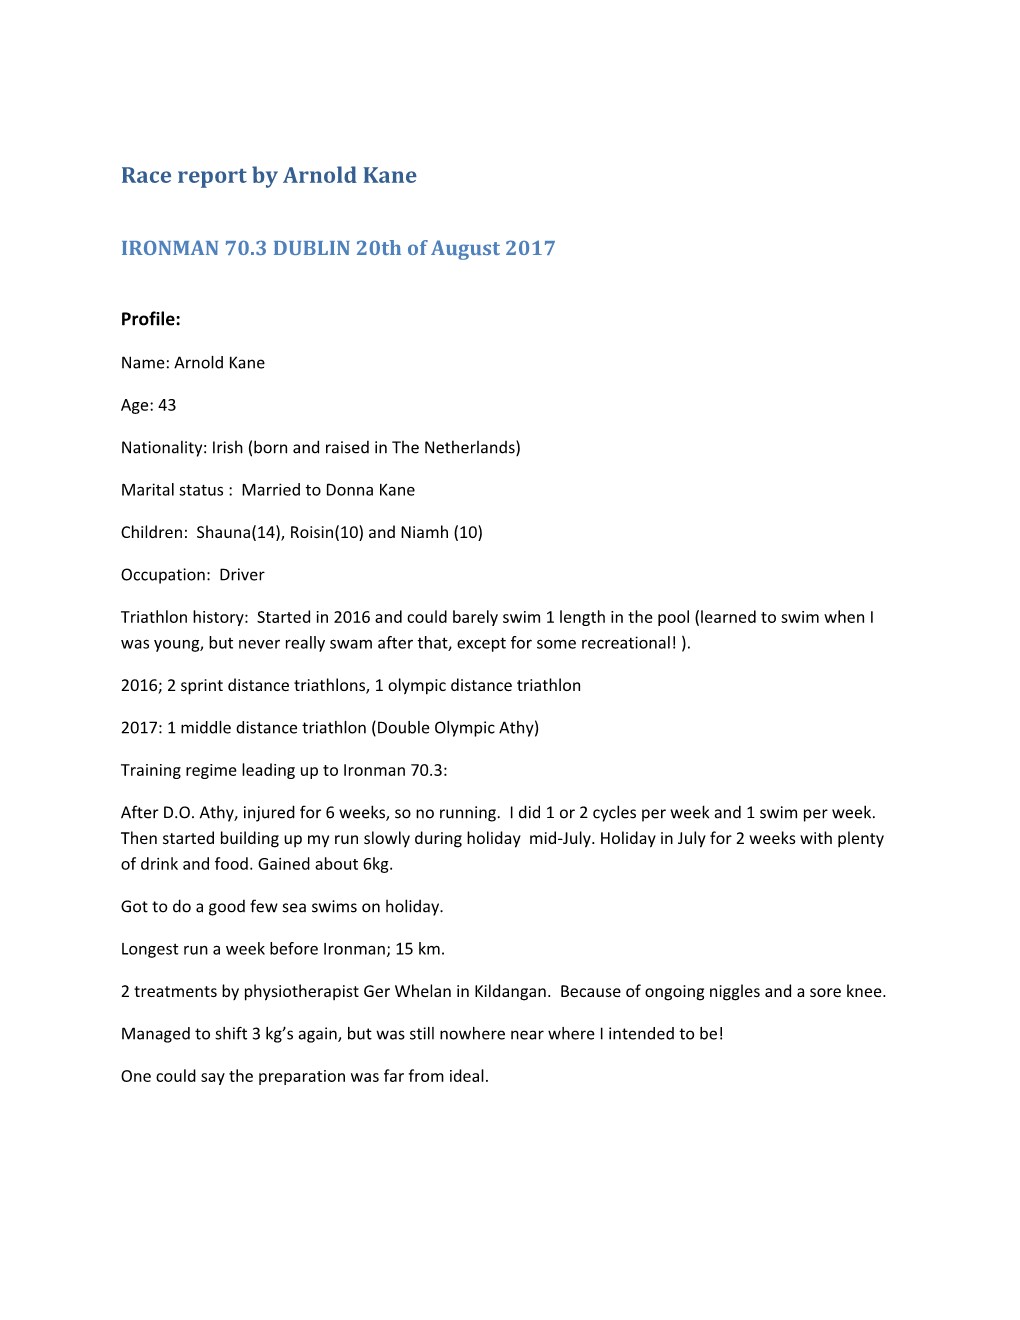 Race Report by Arnold Kane